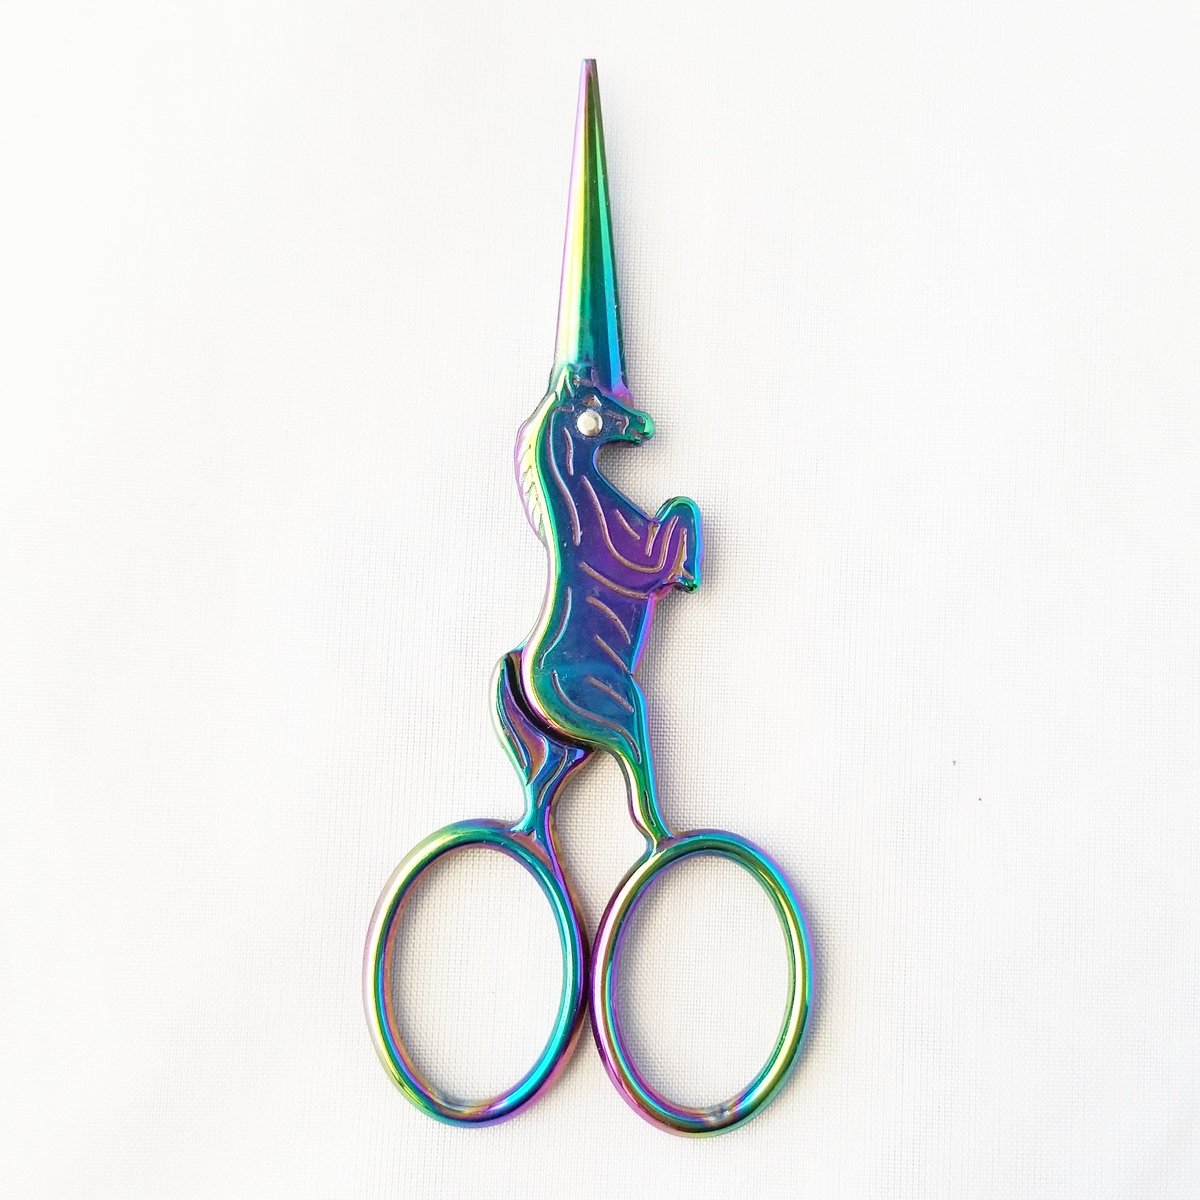 A very sweet follower sent me these unicorn rainbow scissors as a belated birthday gift. I never knew how much I needed this pair of scissors. I've already been using them regularly, and I LOVE them! 

Thank you so much! 🦄🌈✂️

#unicornrainbowscissors
#unicornscissors